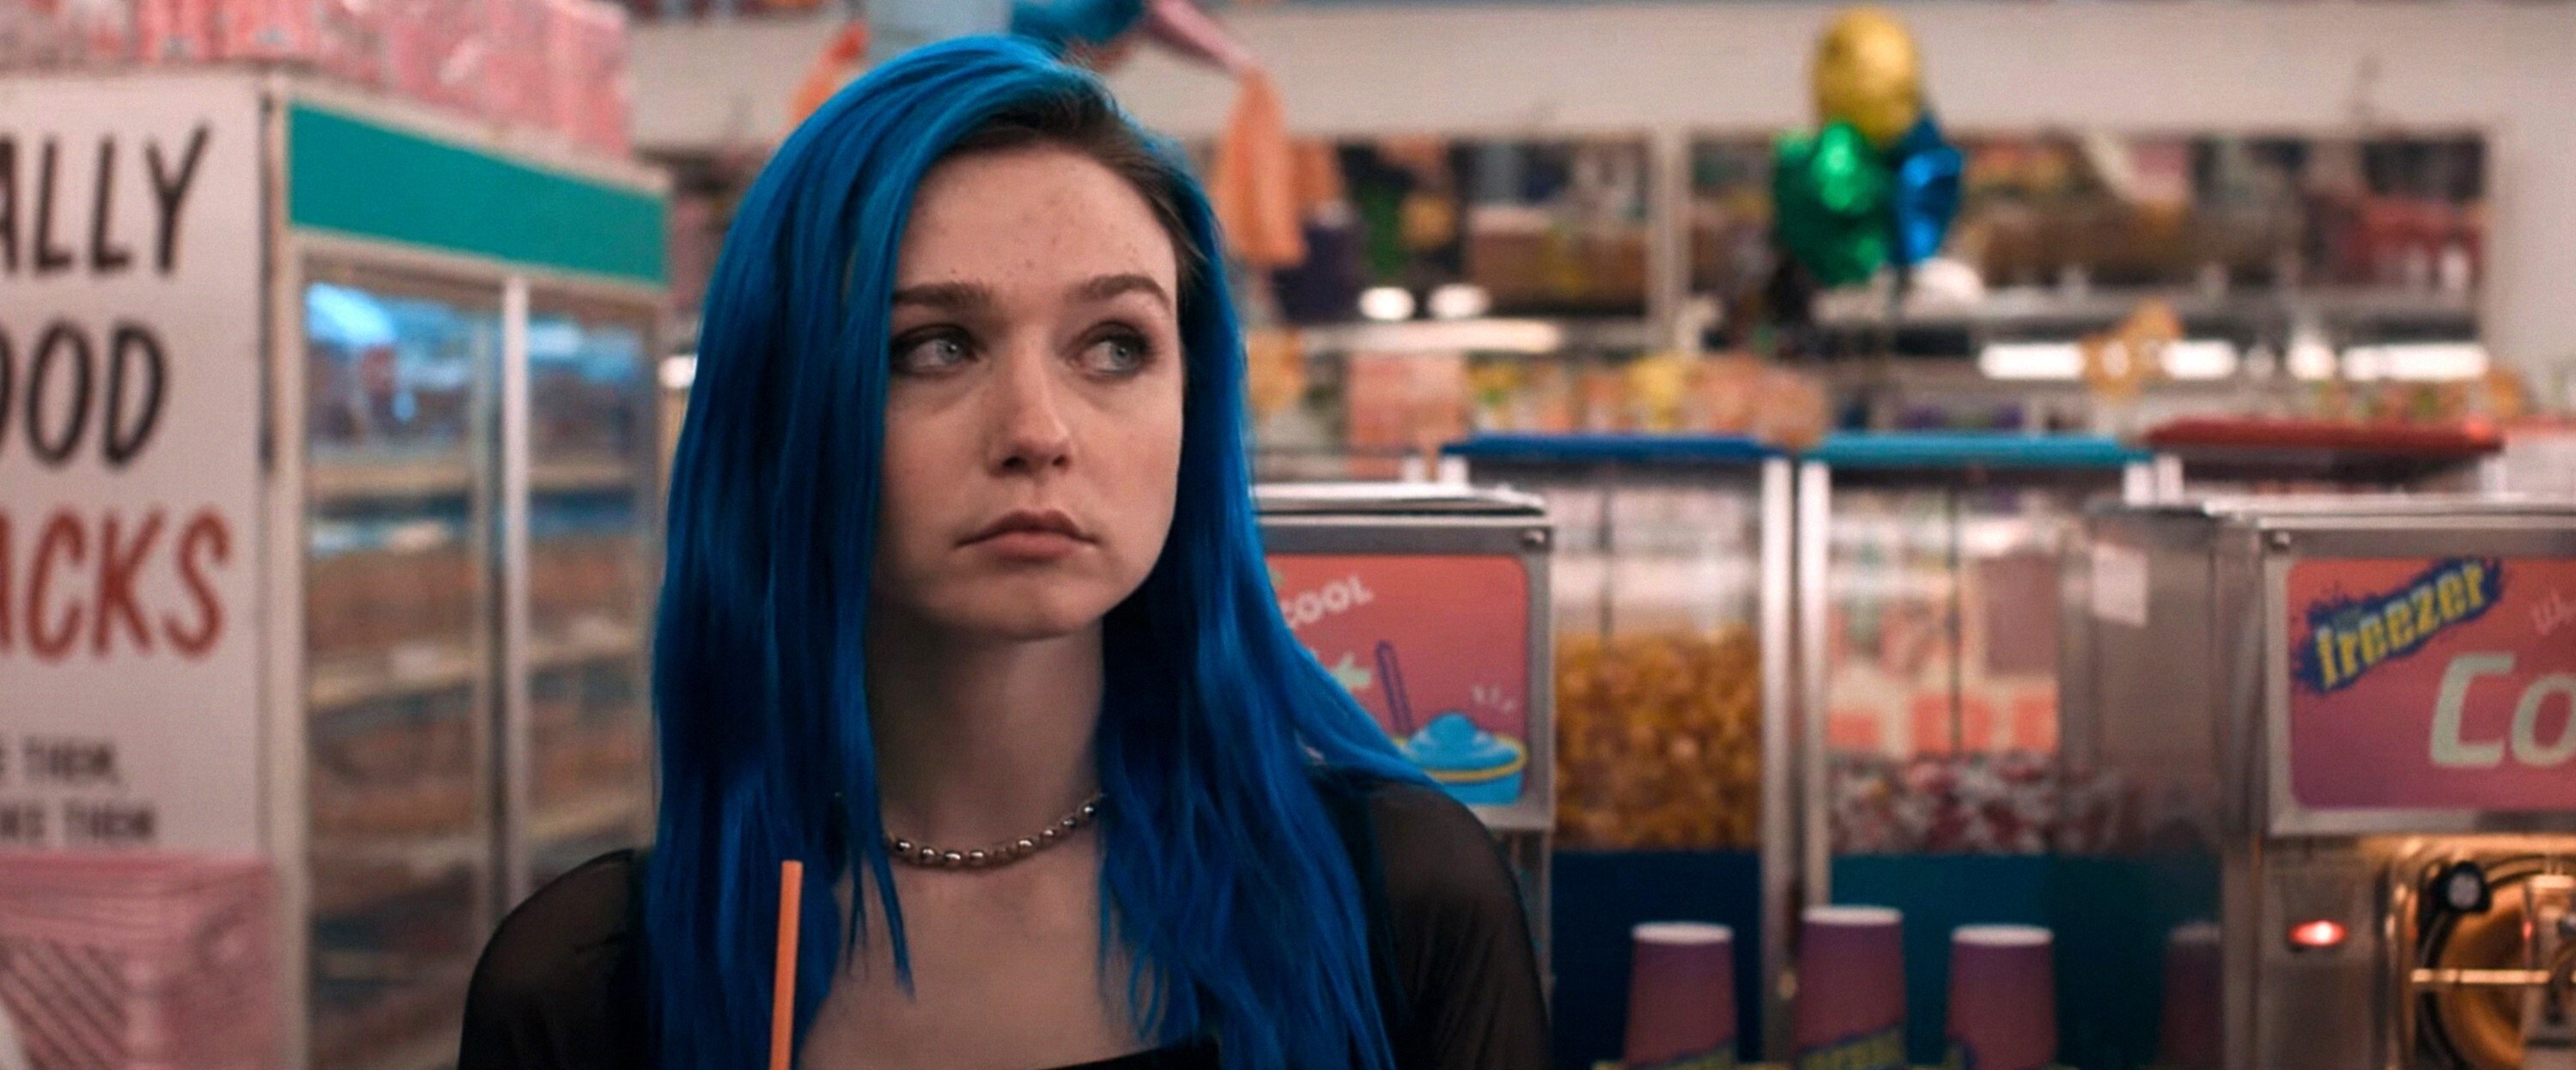 Is there a good blue hair dye without bleach for dark hair? - Quora